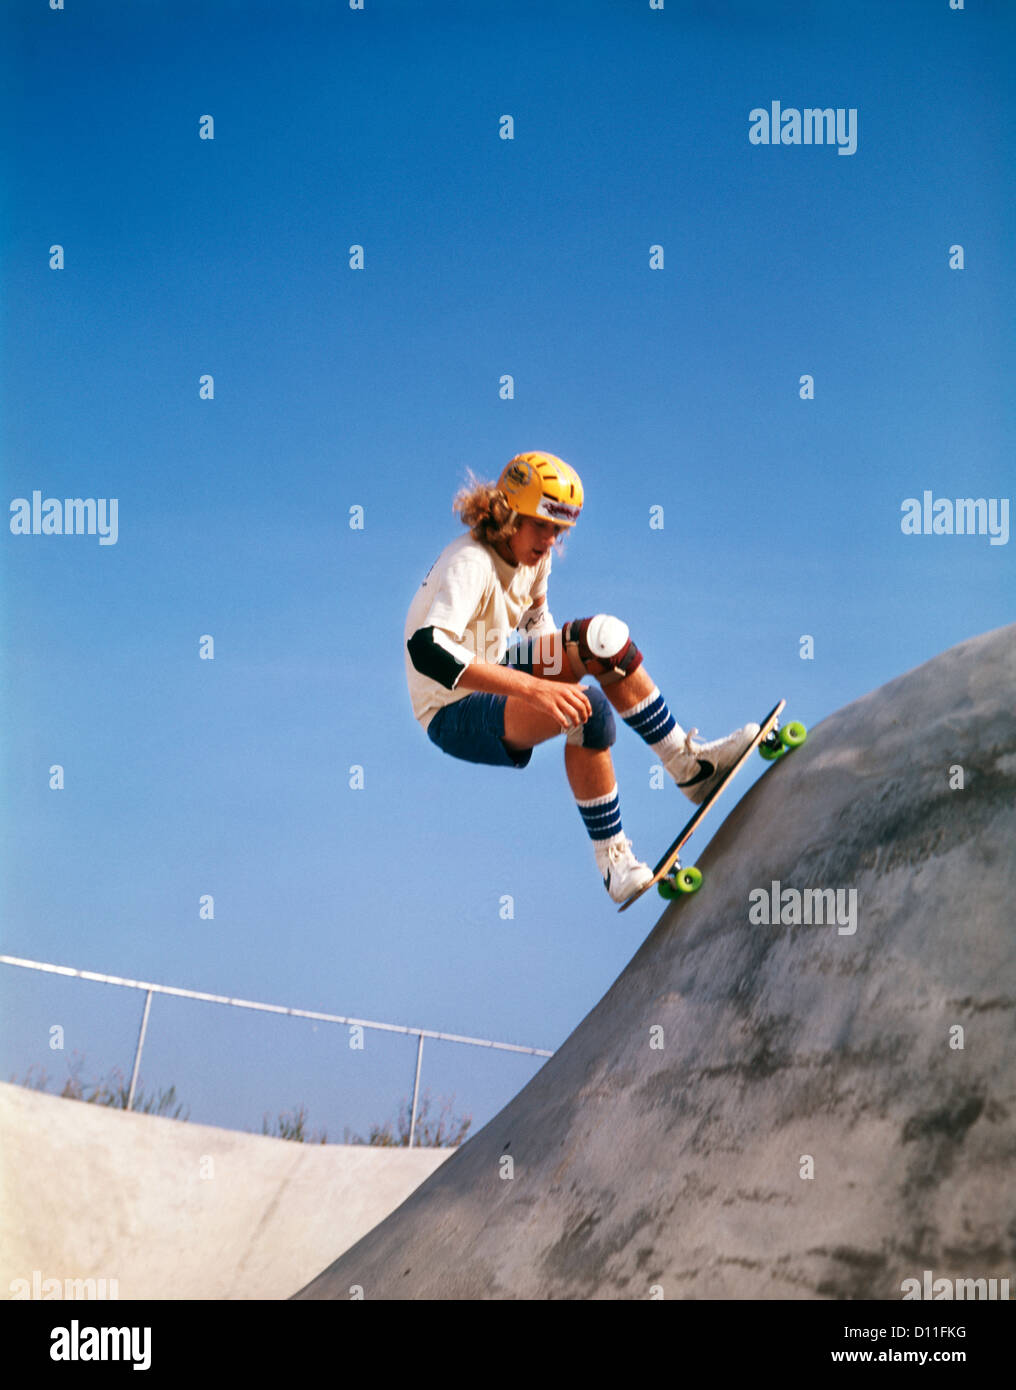 1970s TEENAGE BOY WEARING SAFETY EQUIPMENT SKATE BOARDING ON SKATEBOARD OBSTACLE COURSE Stock Photo